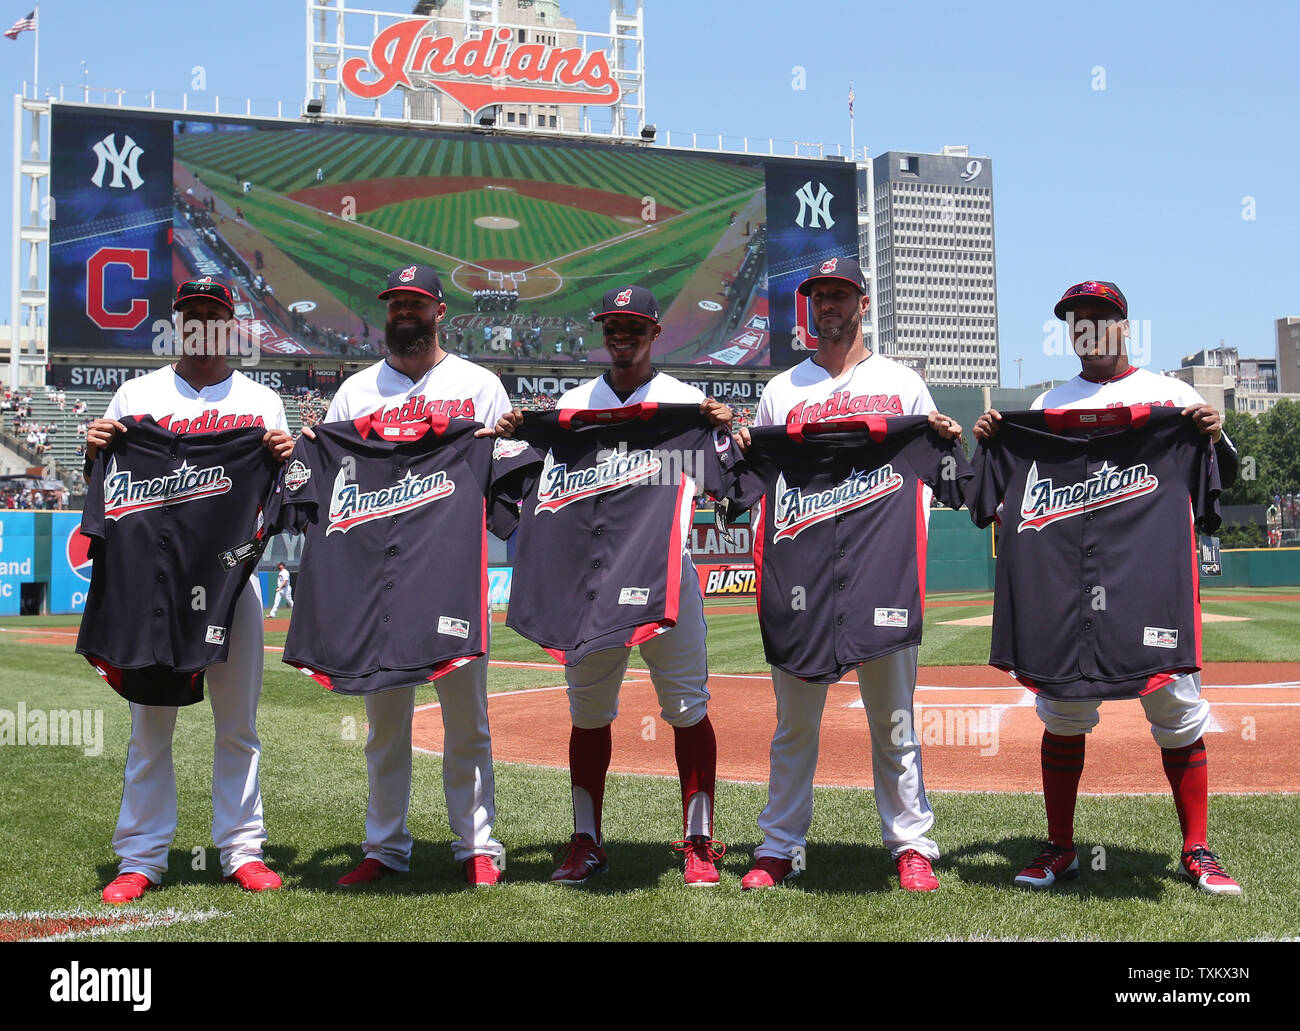 Mlb all star jerseys hi-res stock photography and images - Alamy